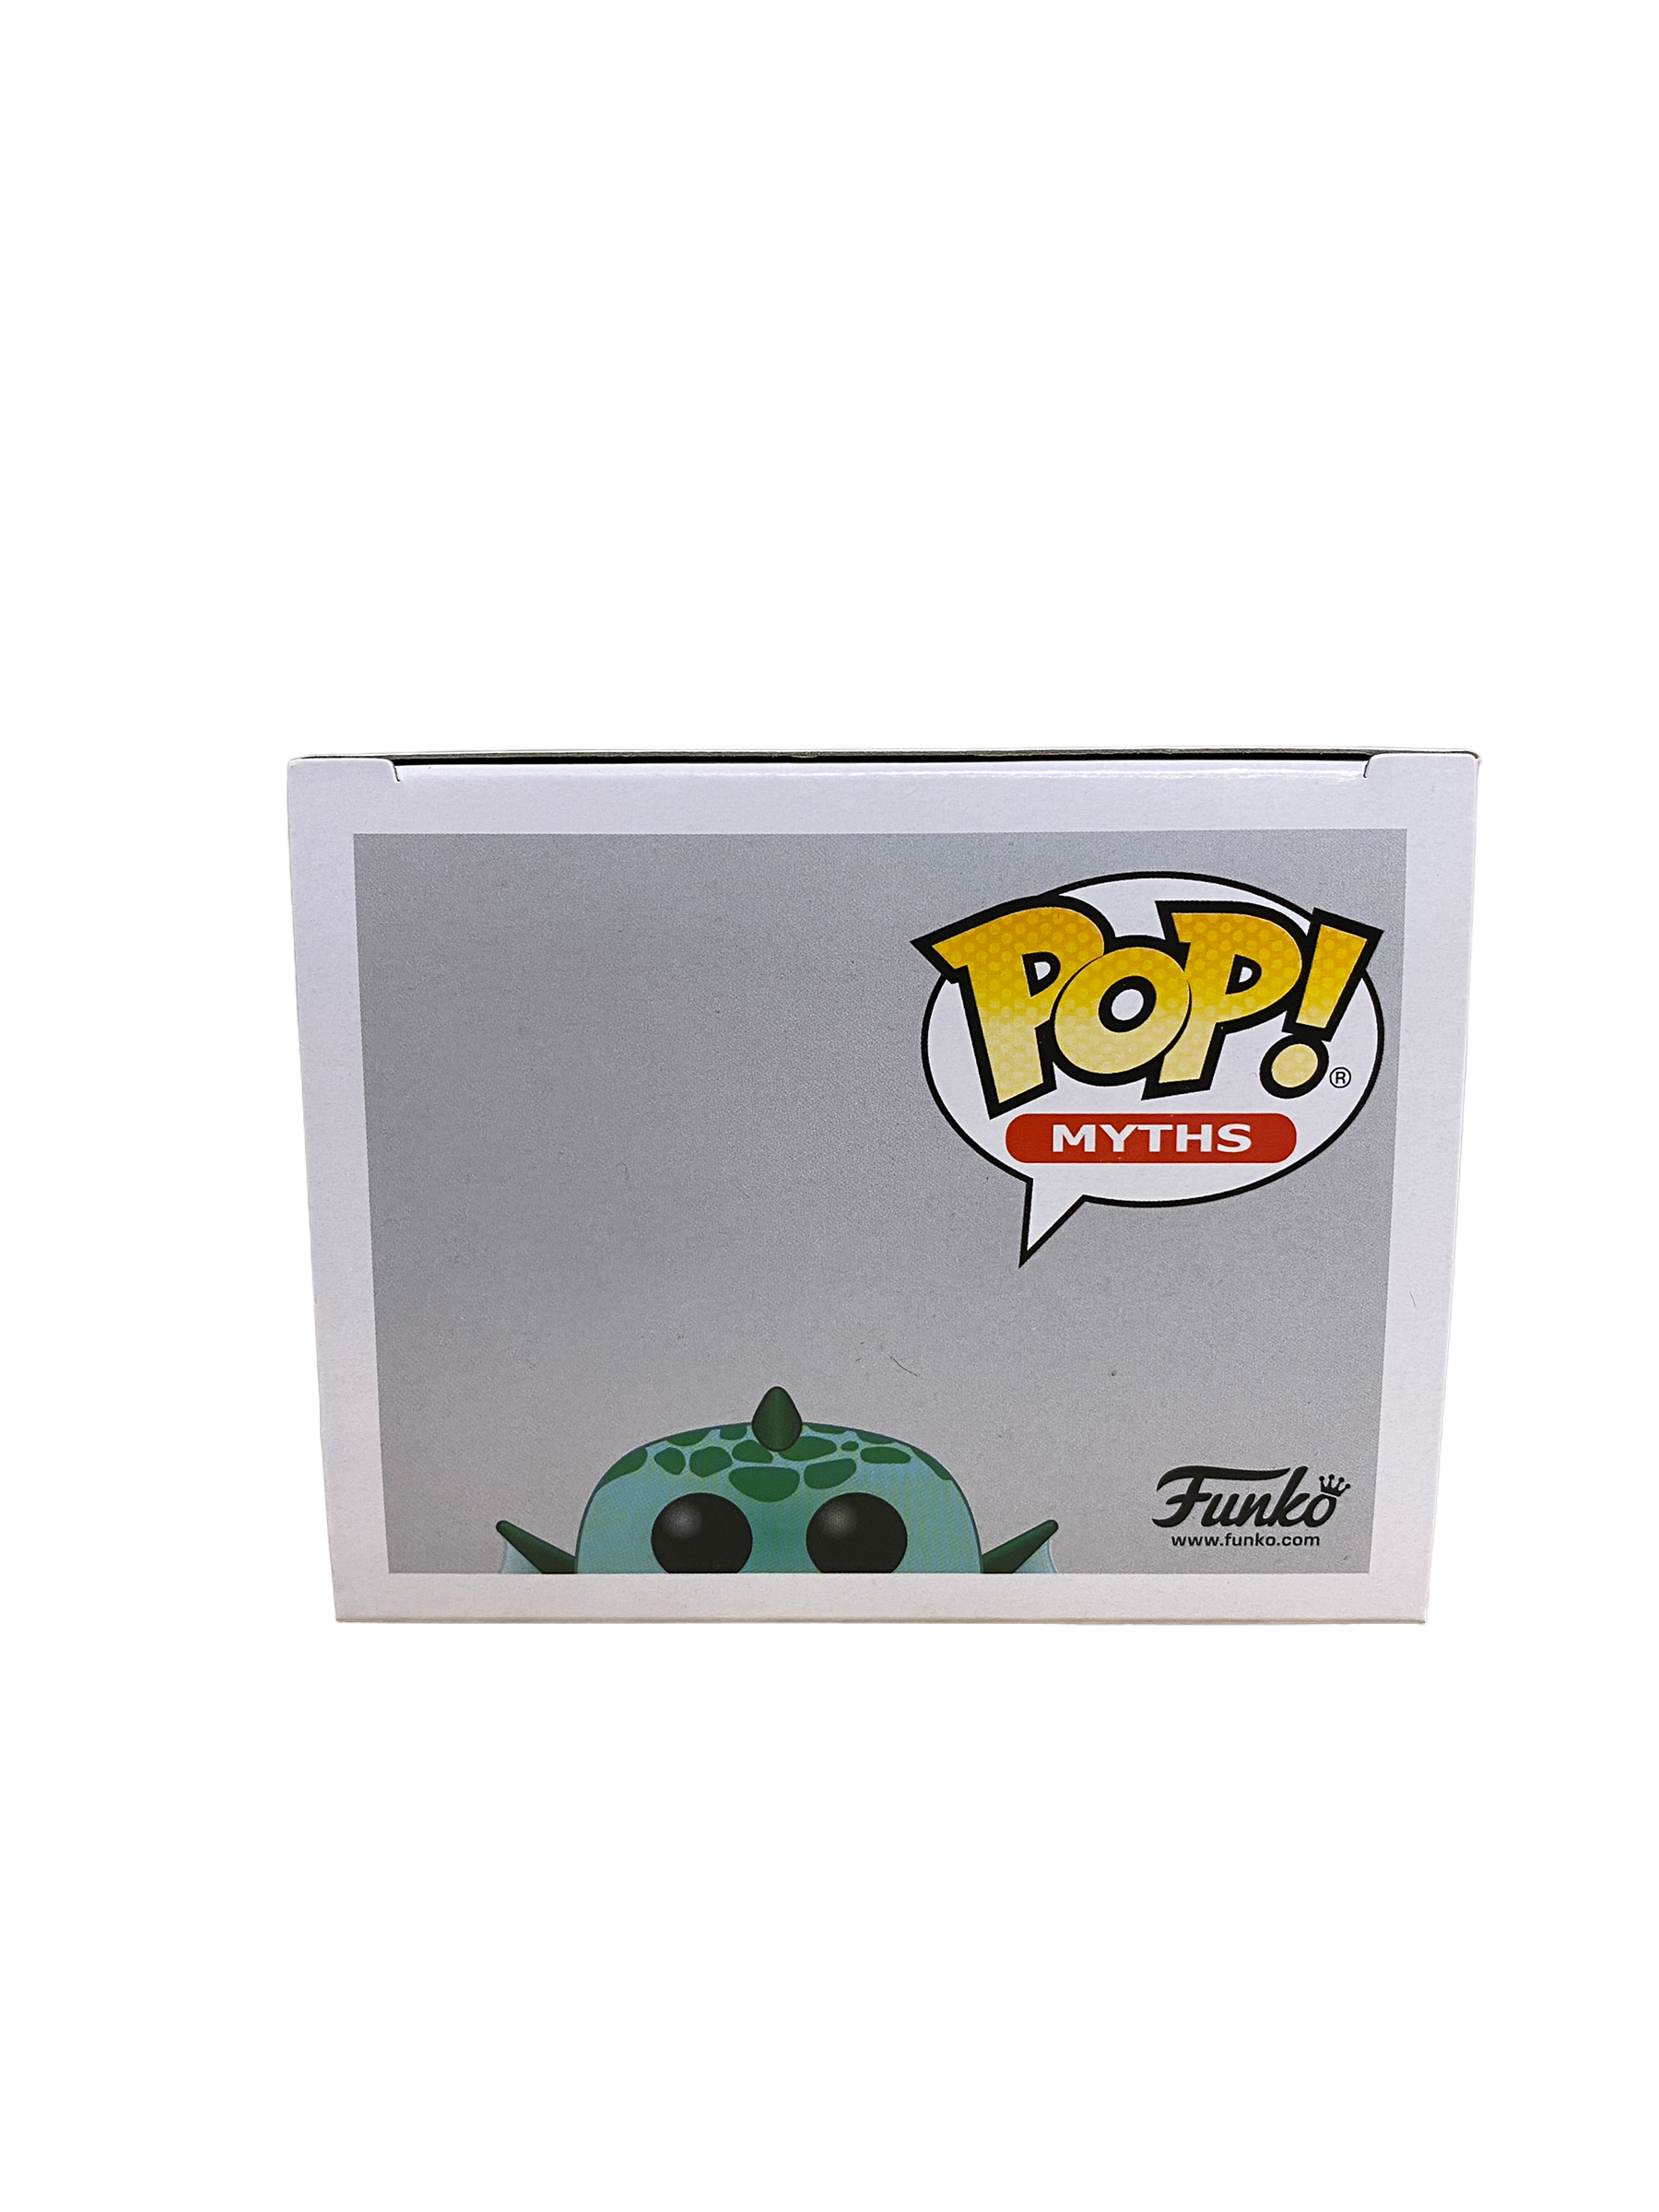 Loch Ness Monster #18 (Glows in the Dark) Funko Pop! - Myths - ECCC 2020 Shared Exclusive LE1500 Pcs - Condition 9/10